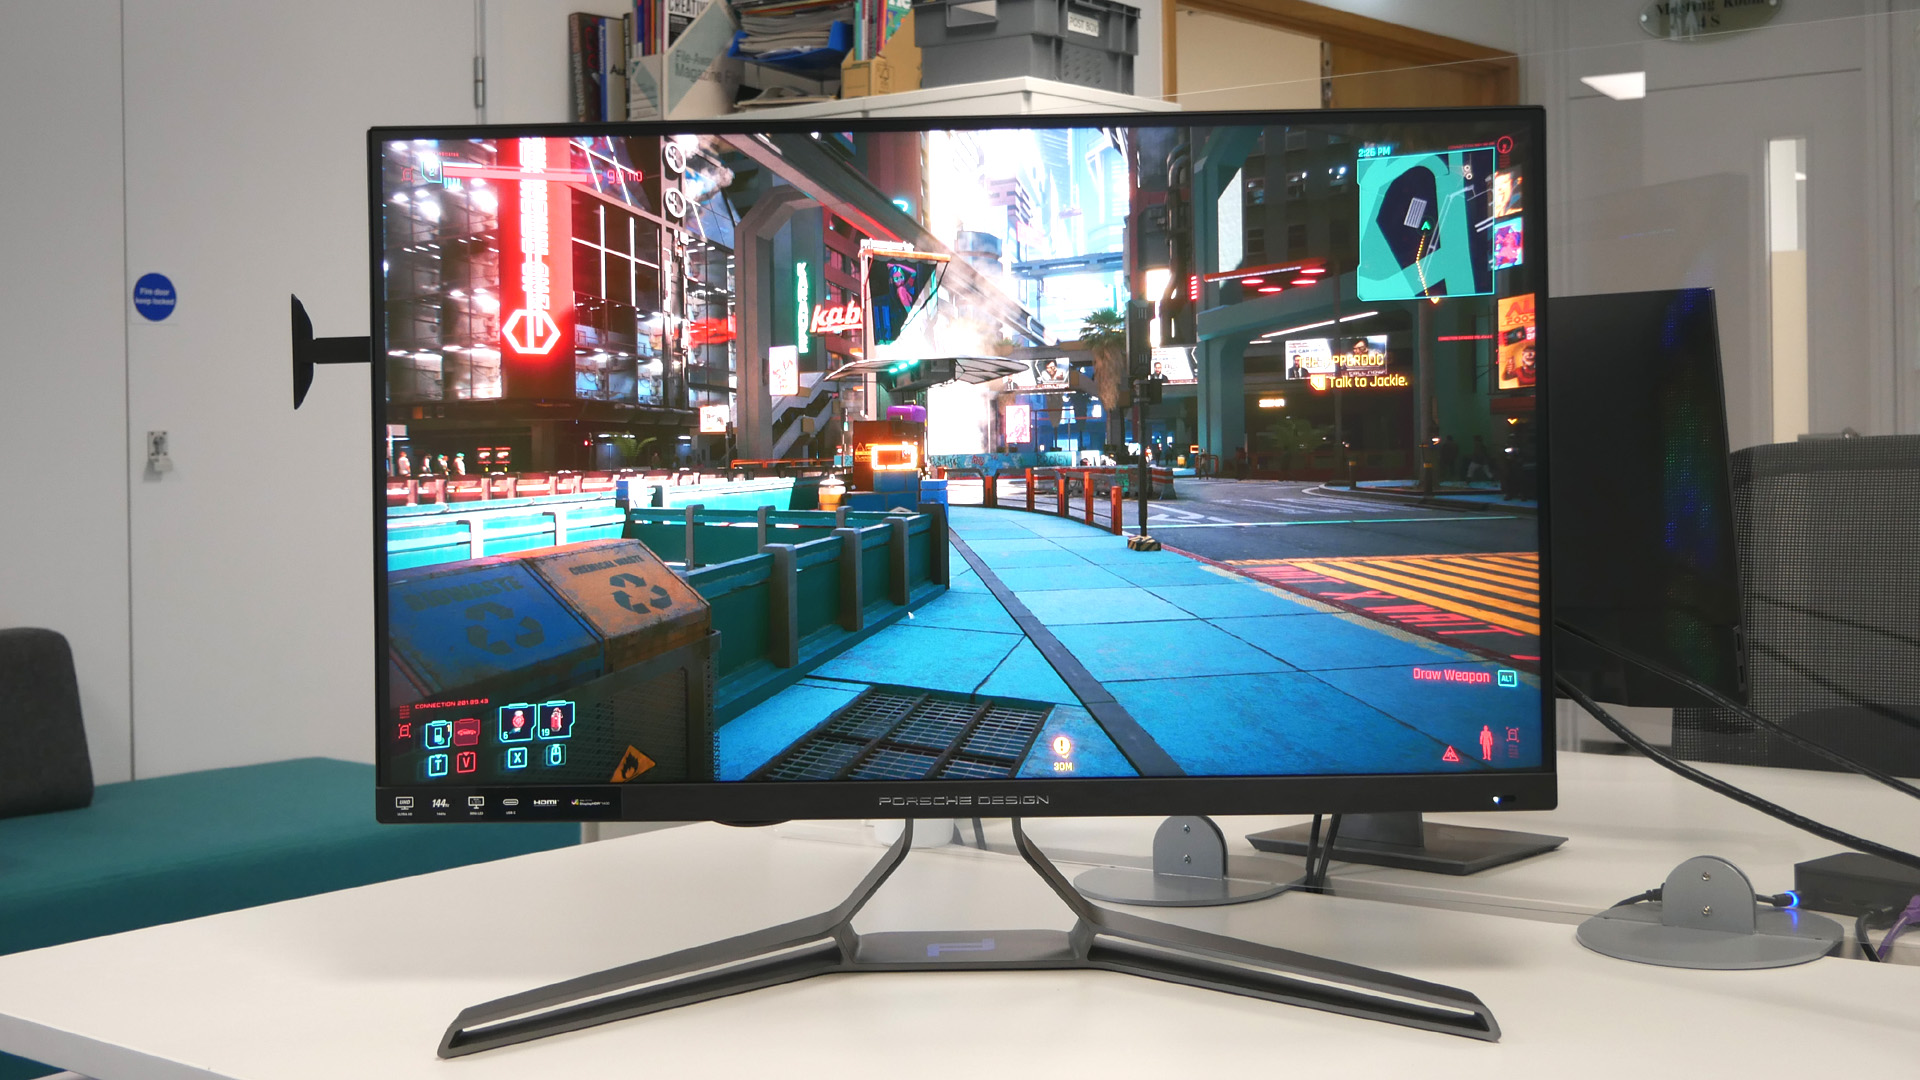 AOC updates its entry-level 4K/144Hz monitor with HDMI 2.1